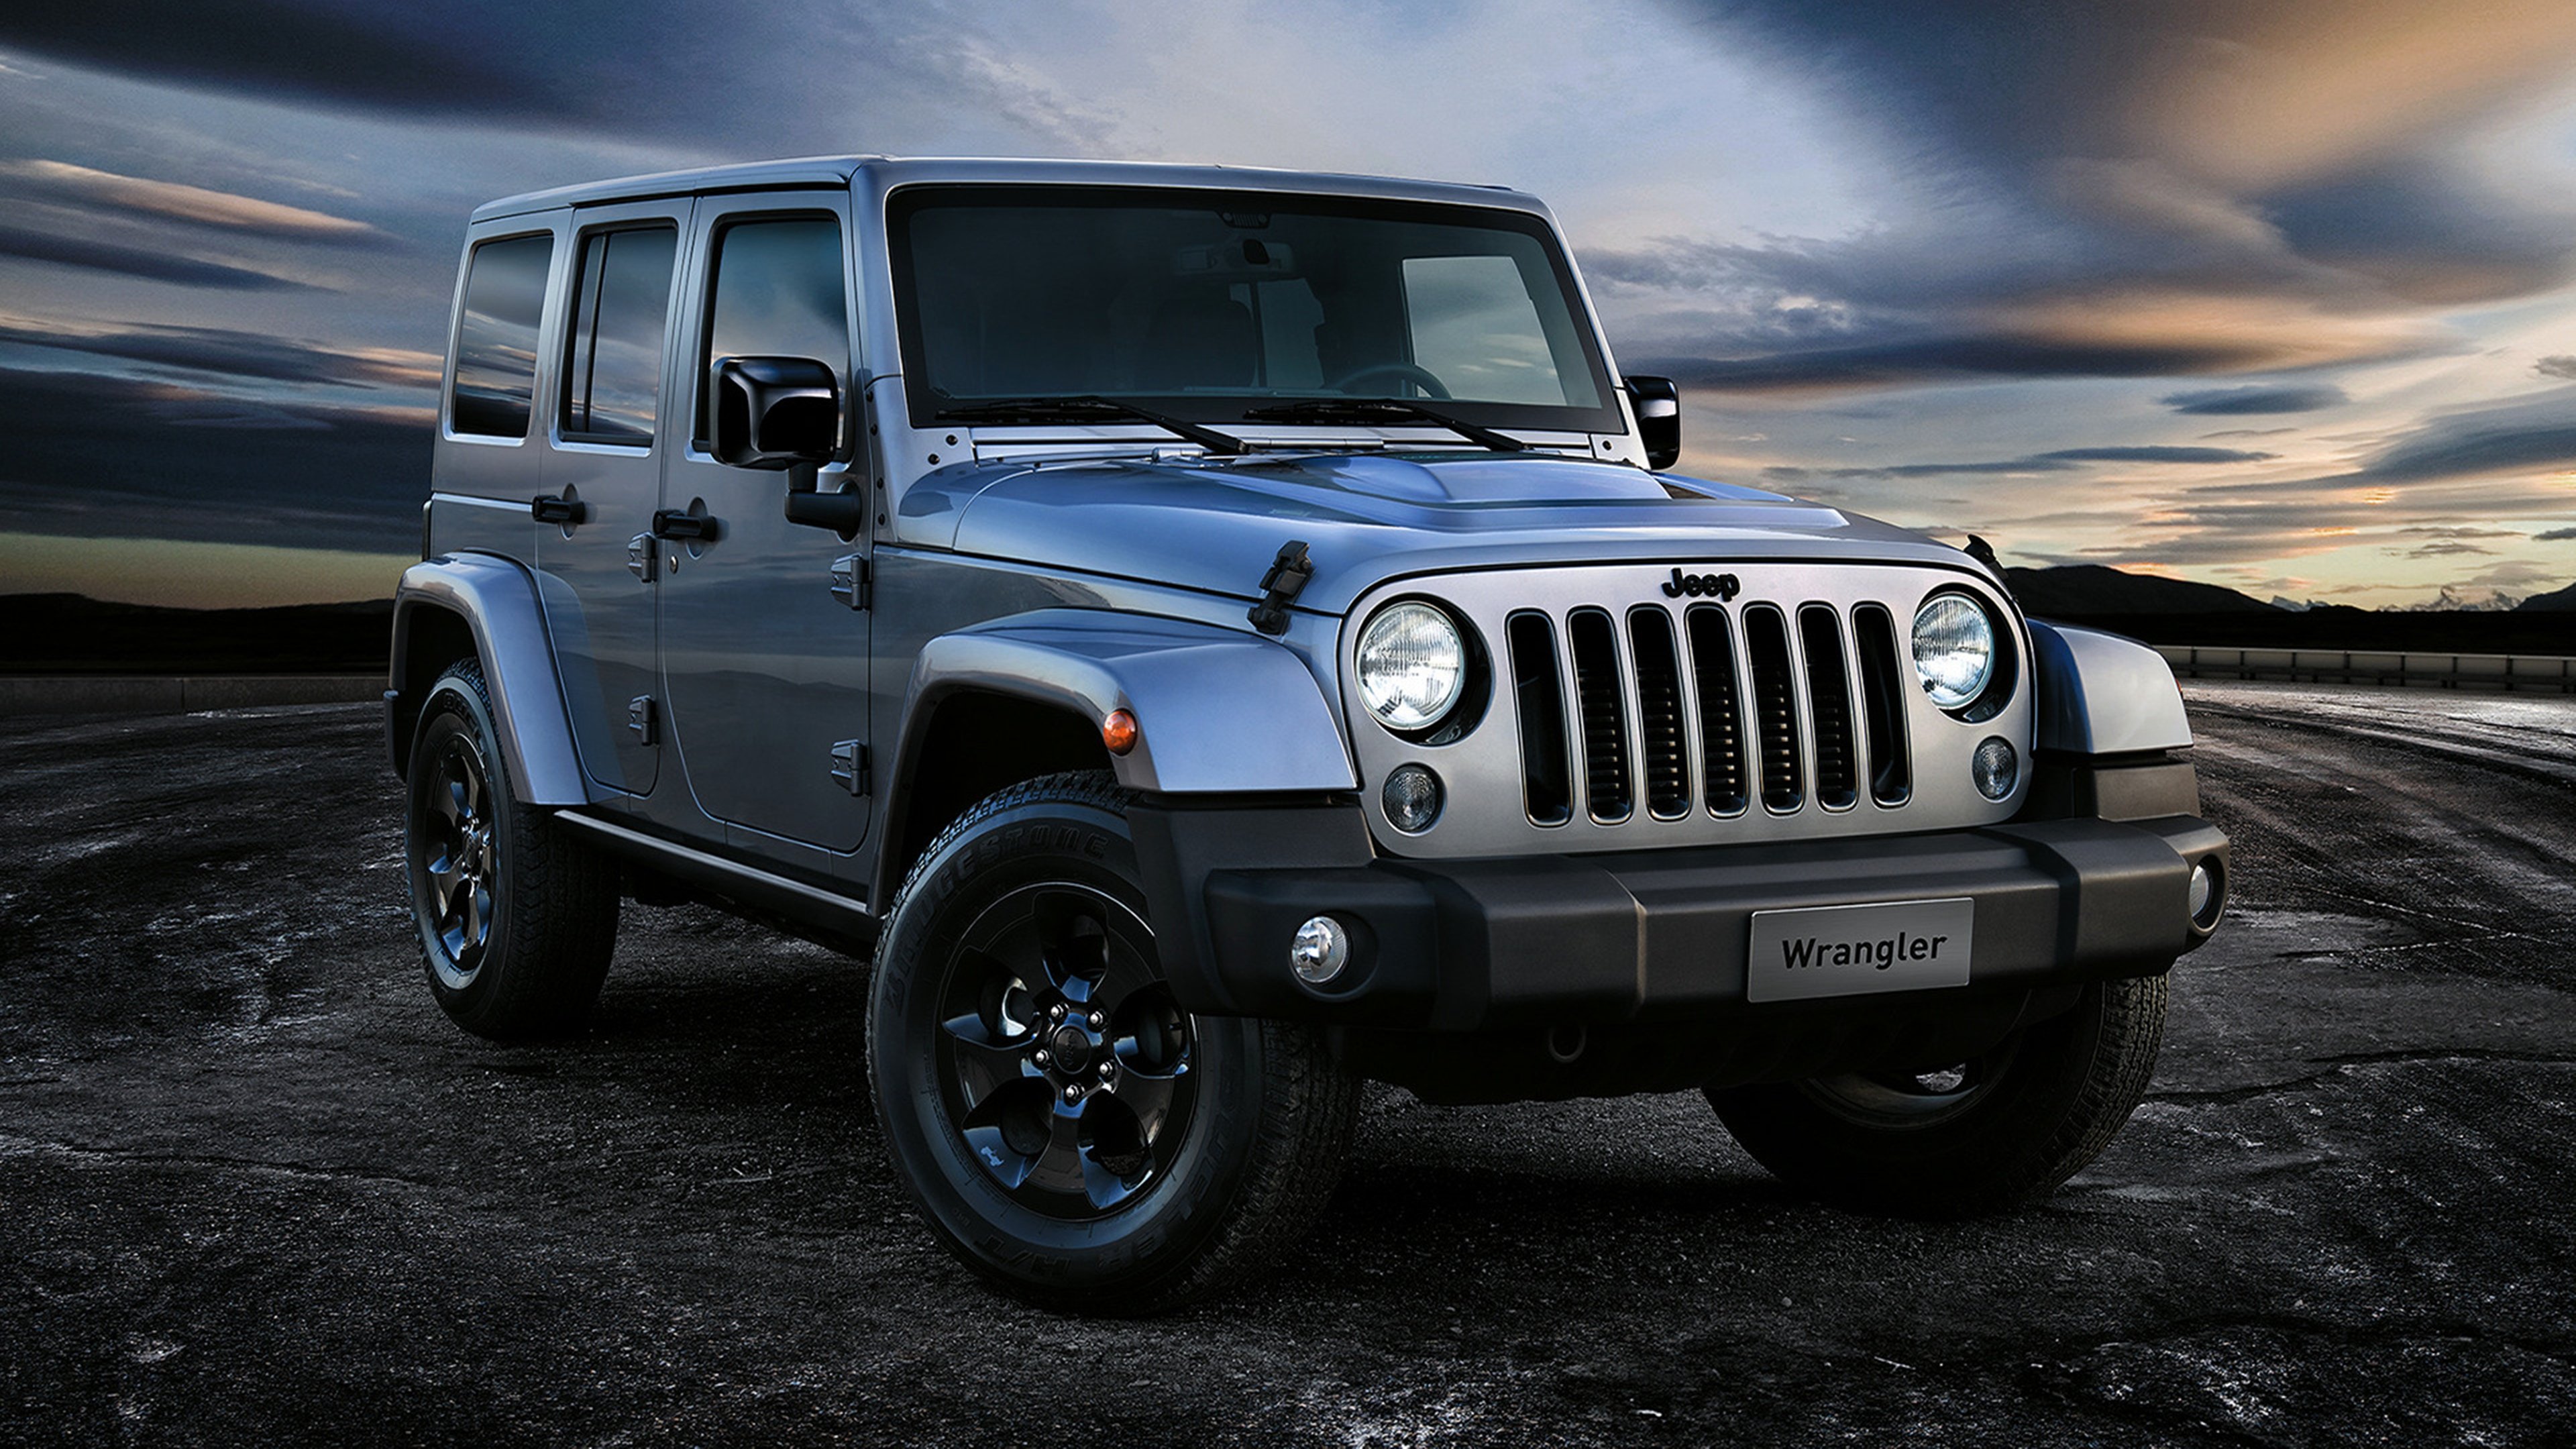 2015, Jeep, Wrangler, Unlimited, Black, Edition, Ii, Gray, Silver, Landscape, Earth, Nature, Motors, Speed, Cars, New Wallpaper